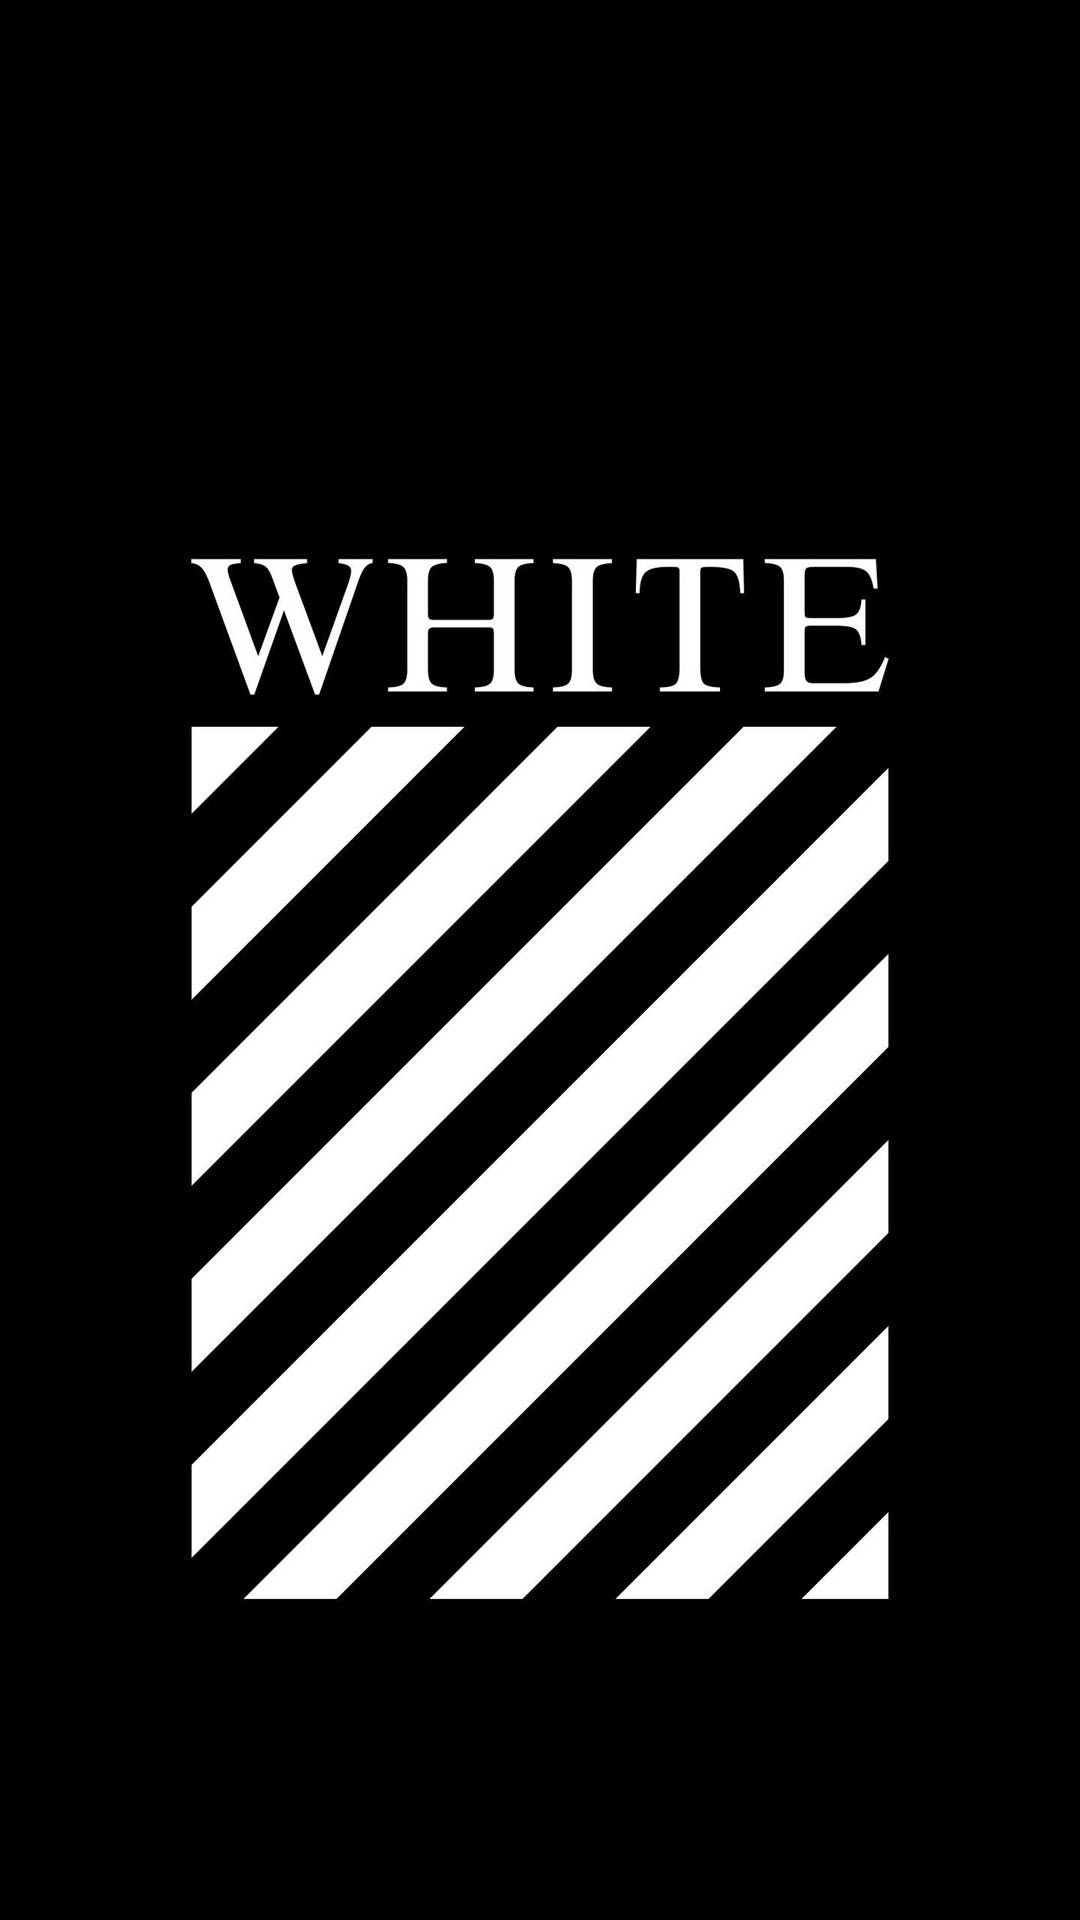 Off White Stripes Dope Iphone Wallpaper